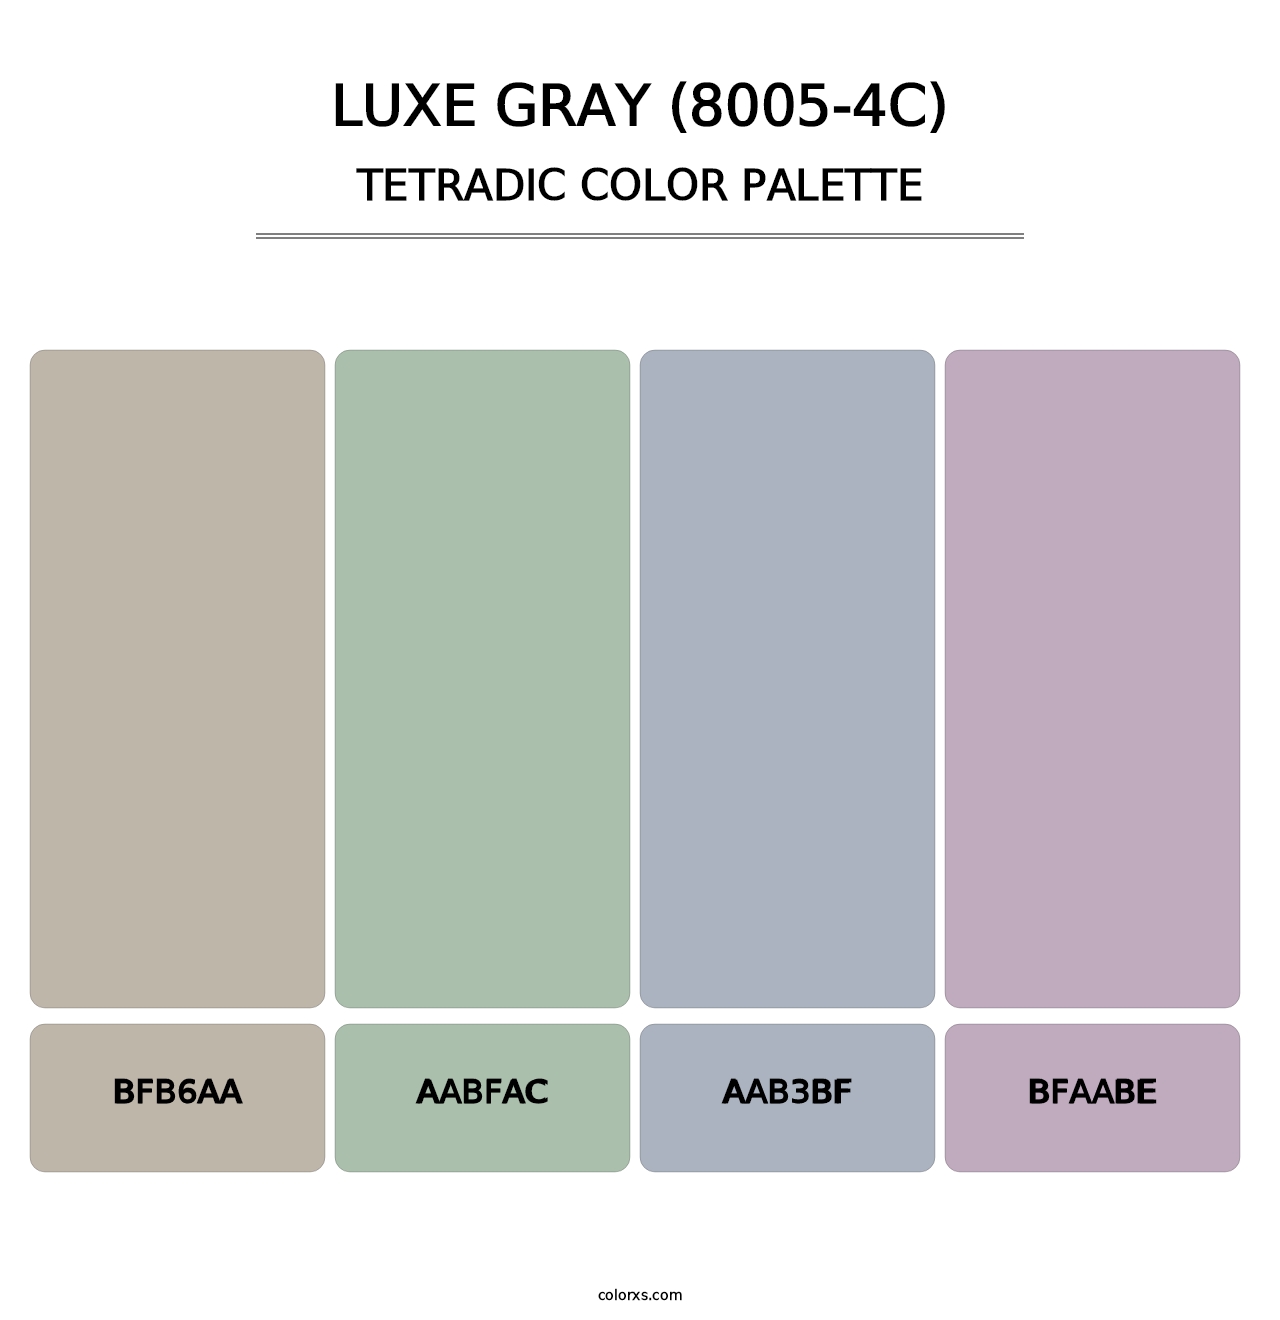 Luxe Gray (8005-4C) - Tetradic Color Palette